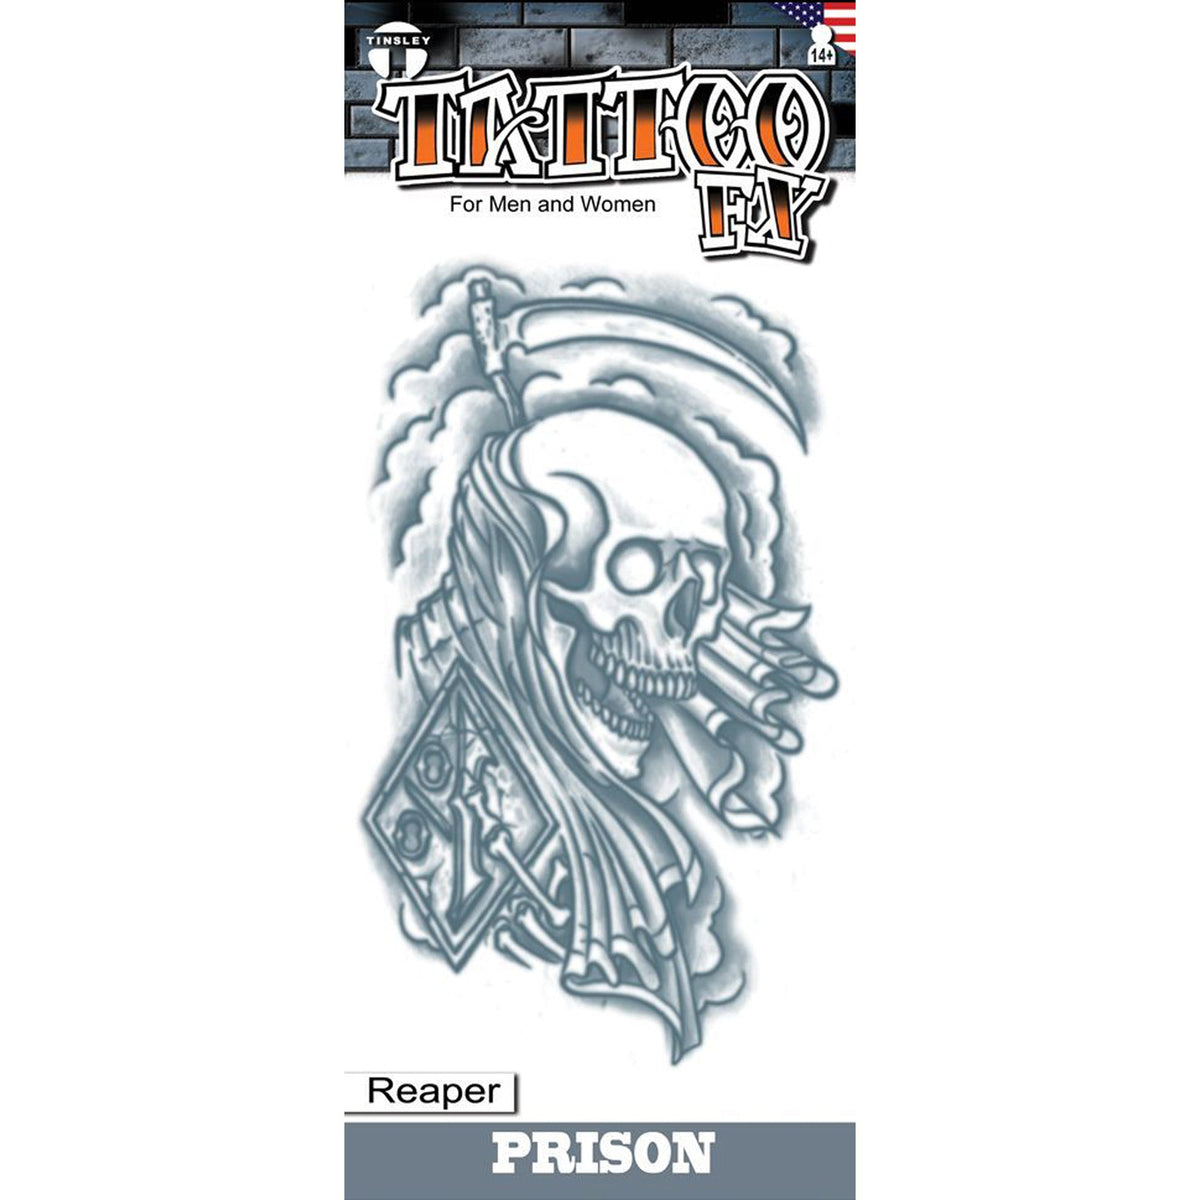 TINSLEY TRANSFERS INC Costume Accessories Prison Reaper Temporary Tattoos 893507001225